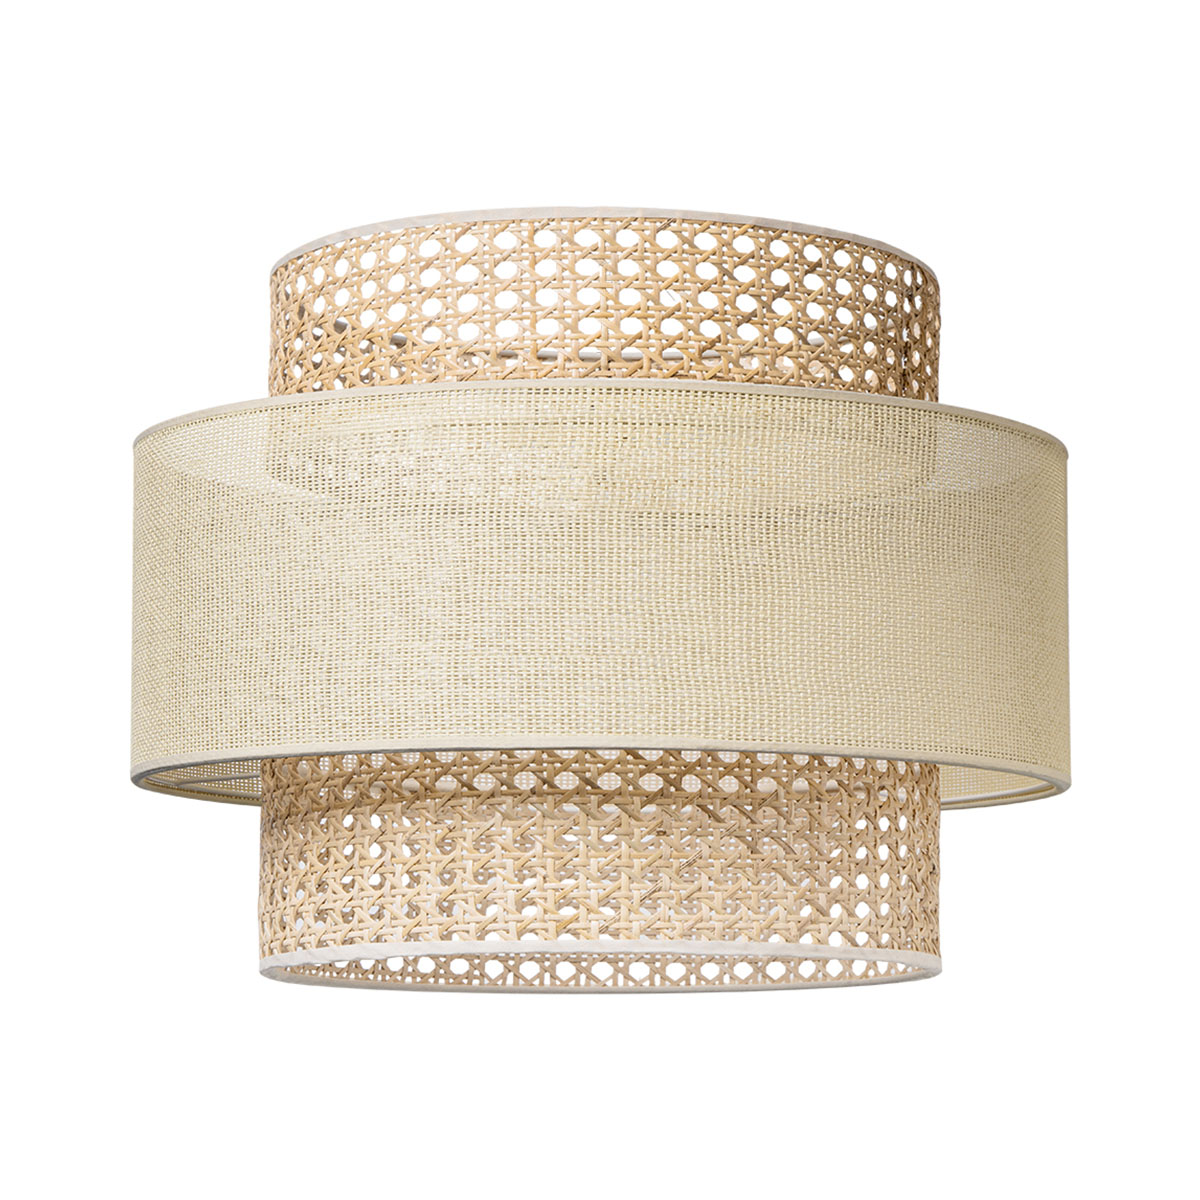 Tangla lighting - TLS7085-01L - Decorative Lampshade - natural rattan and linen in natural - large - E27